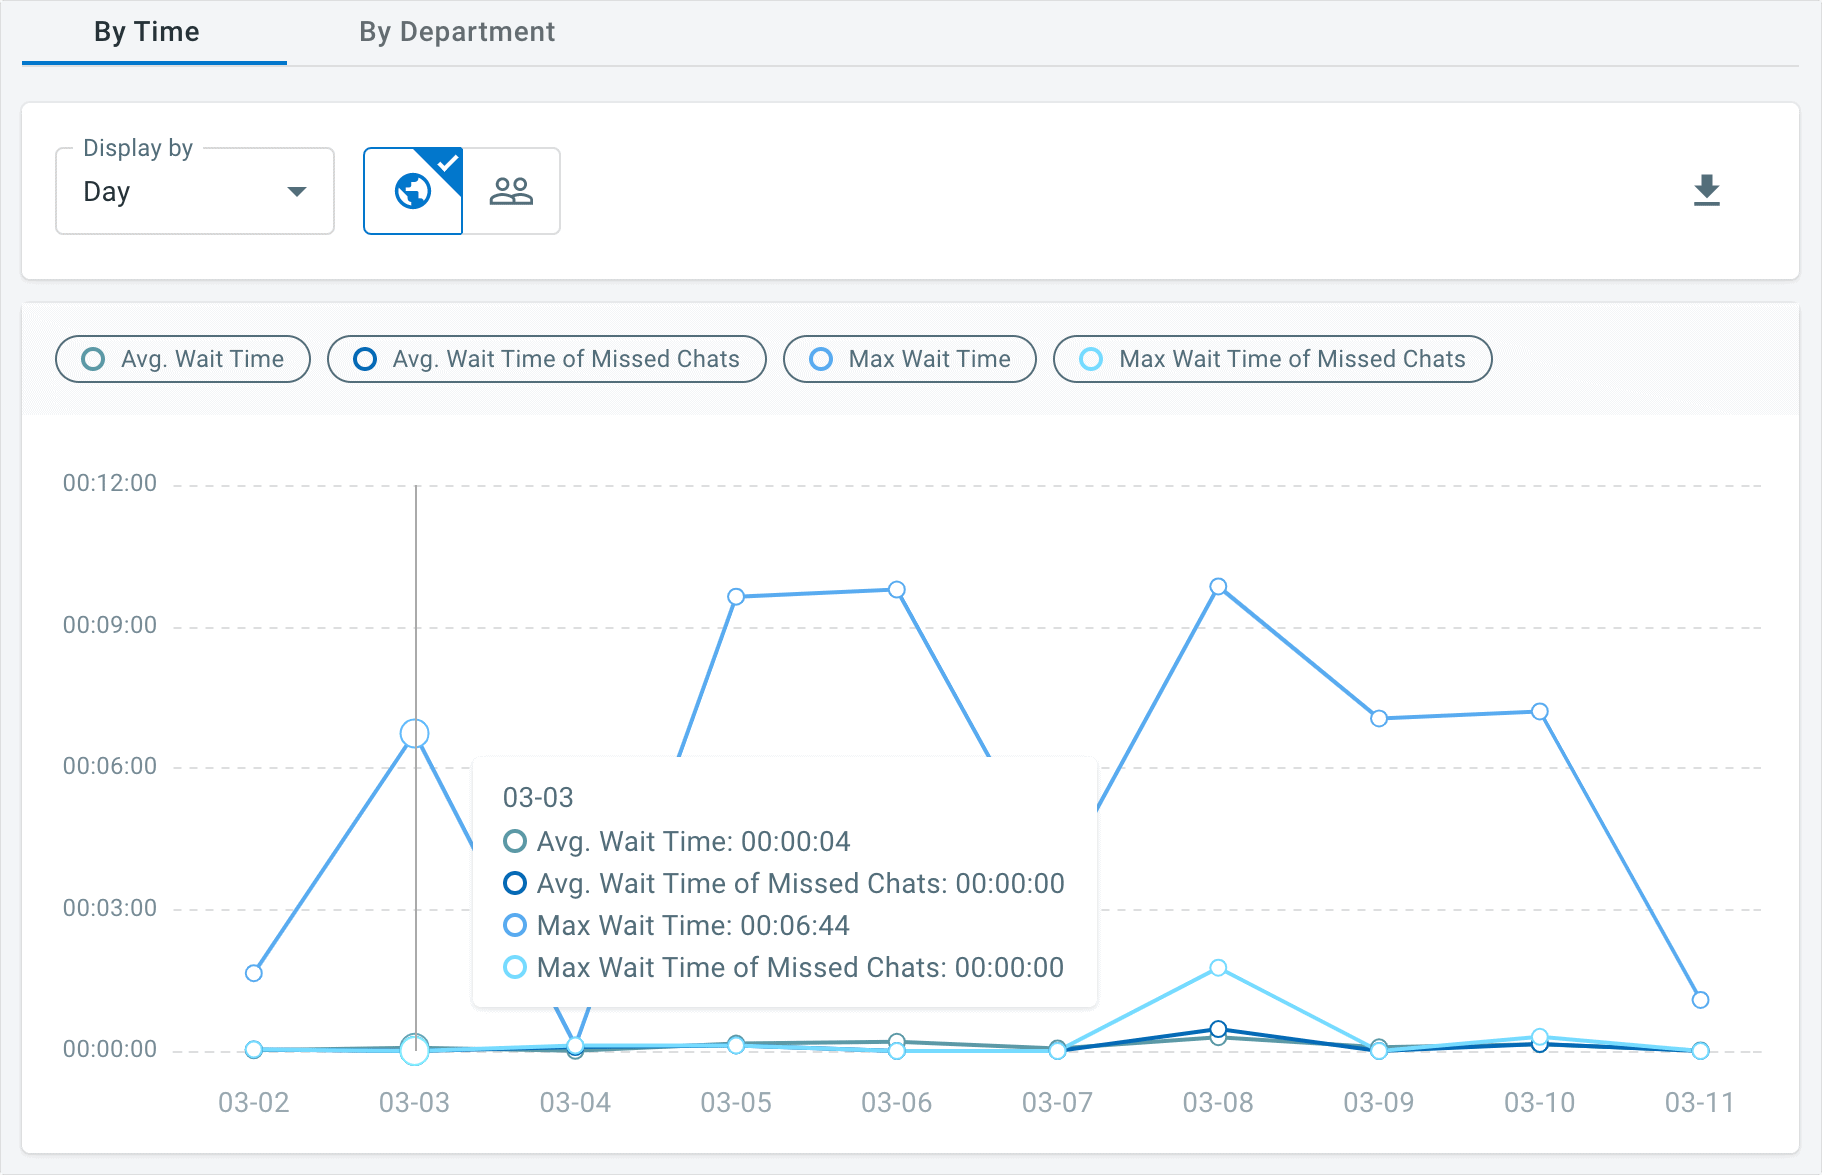 you can track live chat wait time via comm100 reports